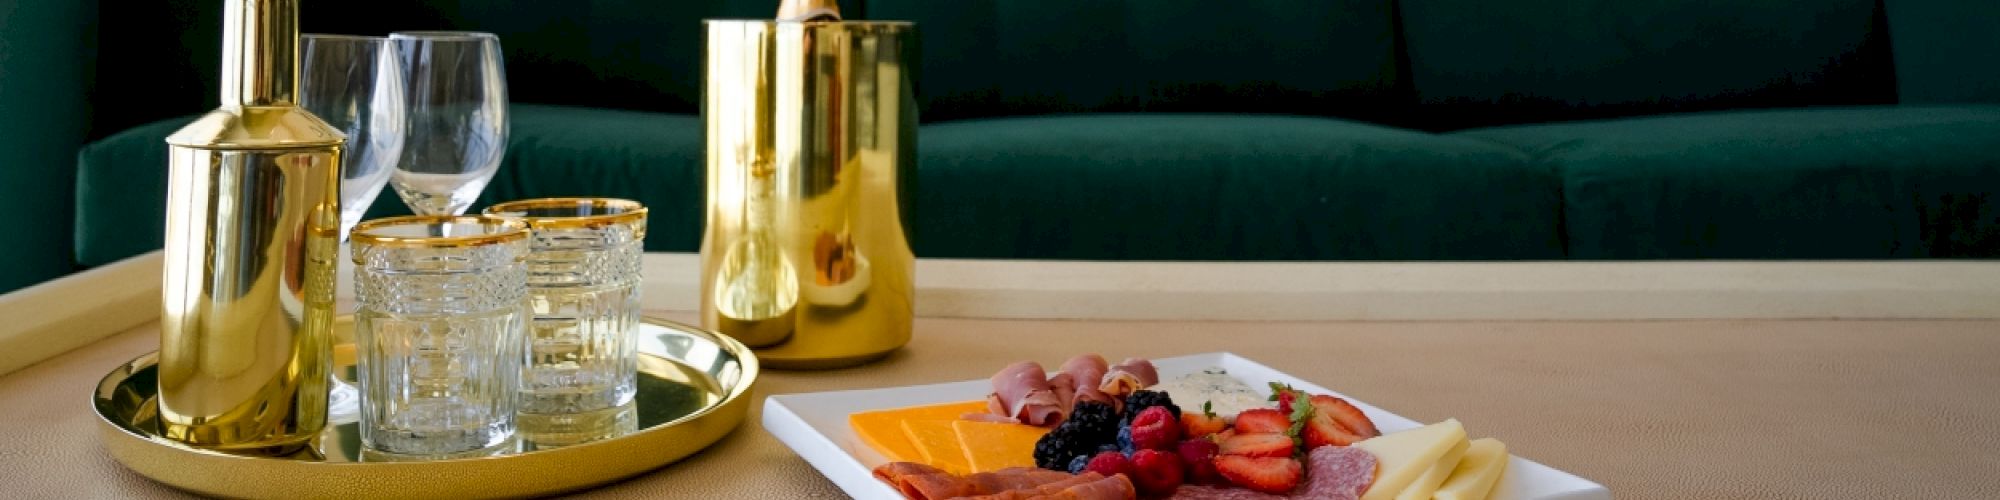 The image shows a tray with gold-colored drinkware and a platter with cheese, meats, and fruits, set in front of a green couch.